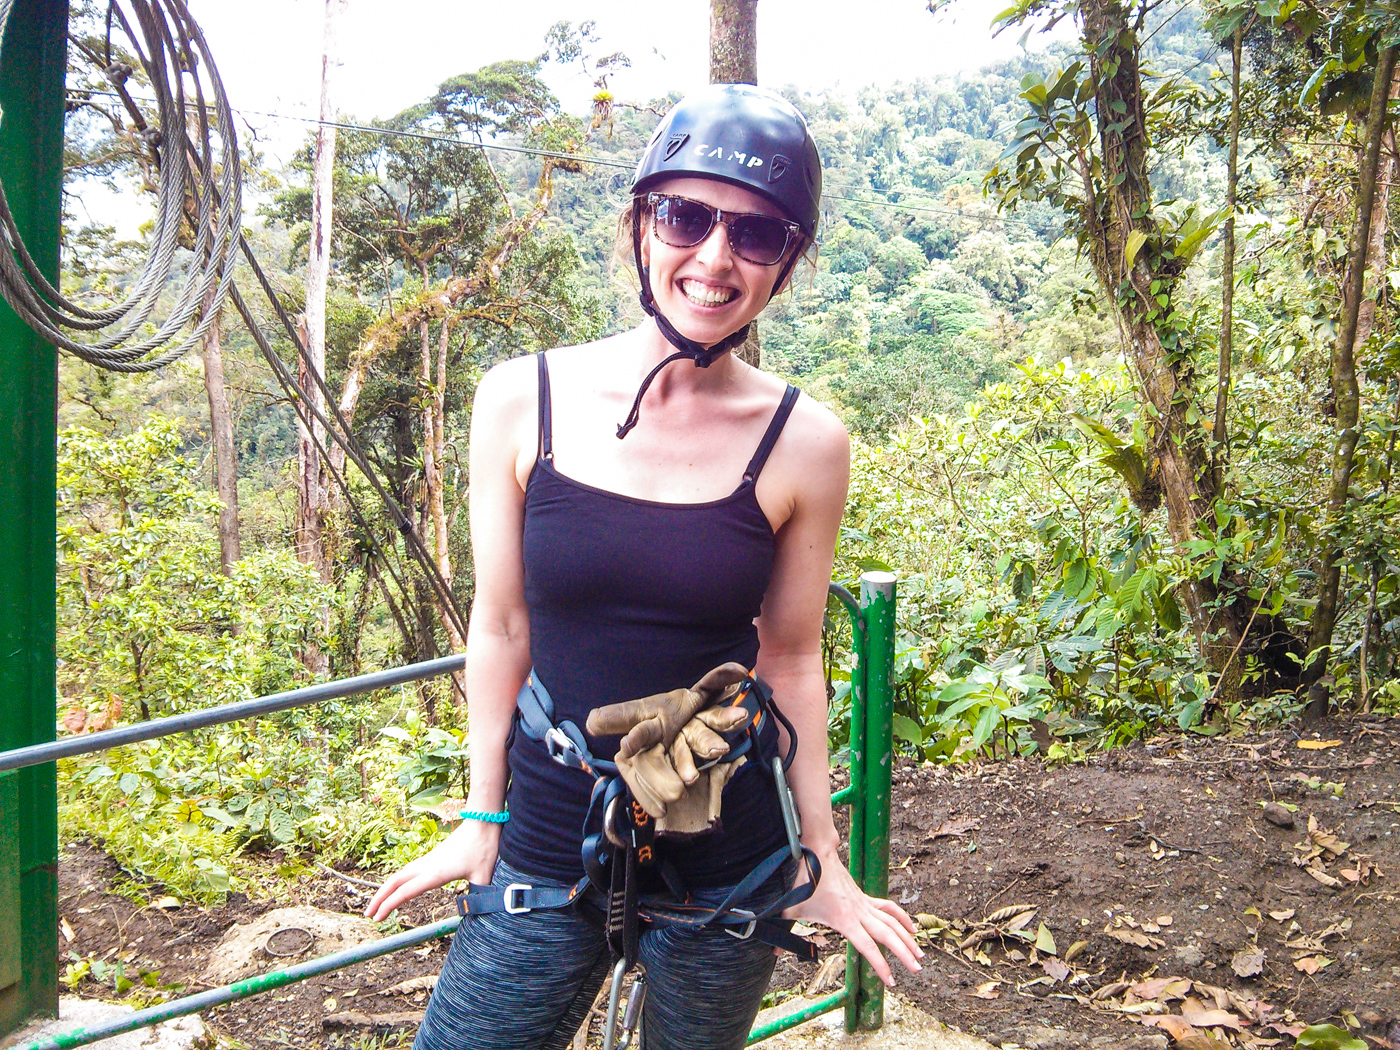 Diana Southern in her ziplining gear with Sky Adventures Costa Rica